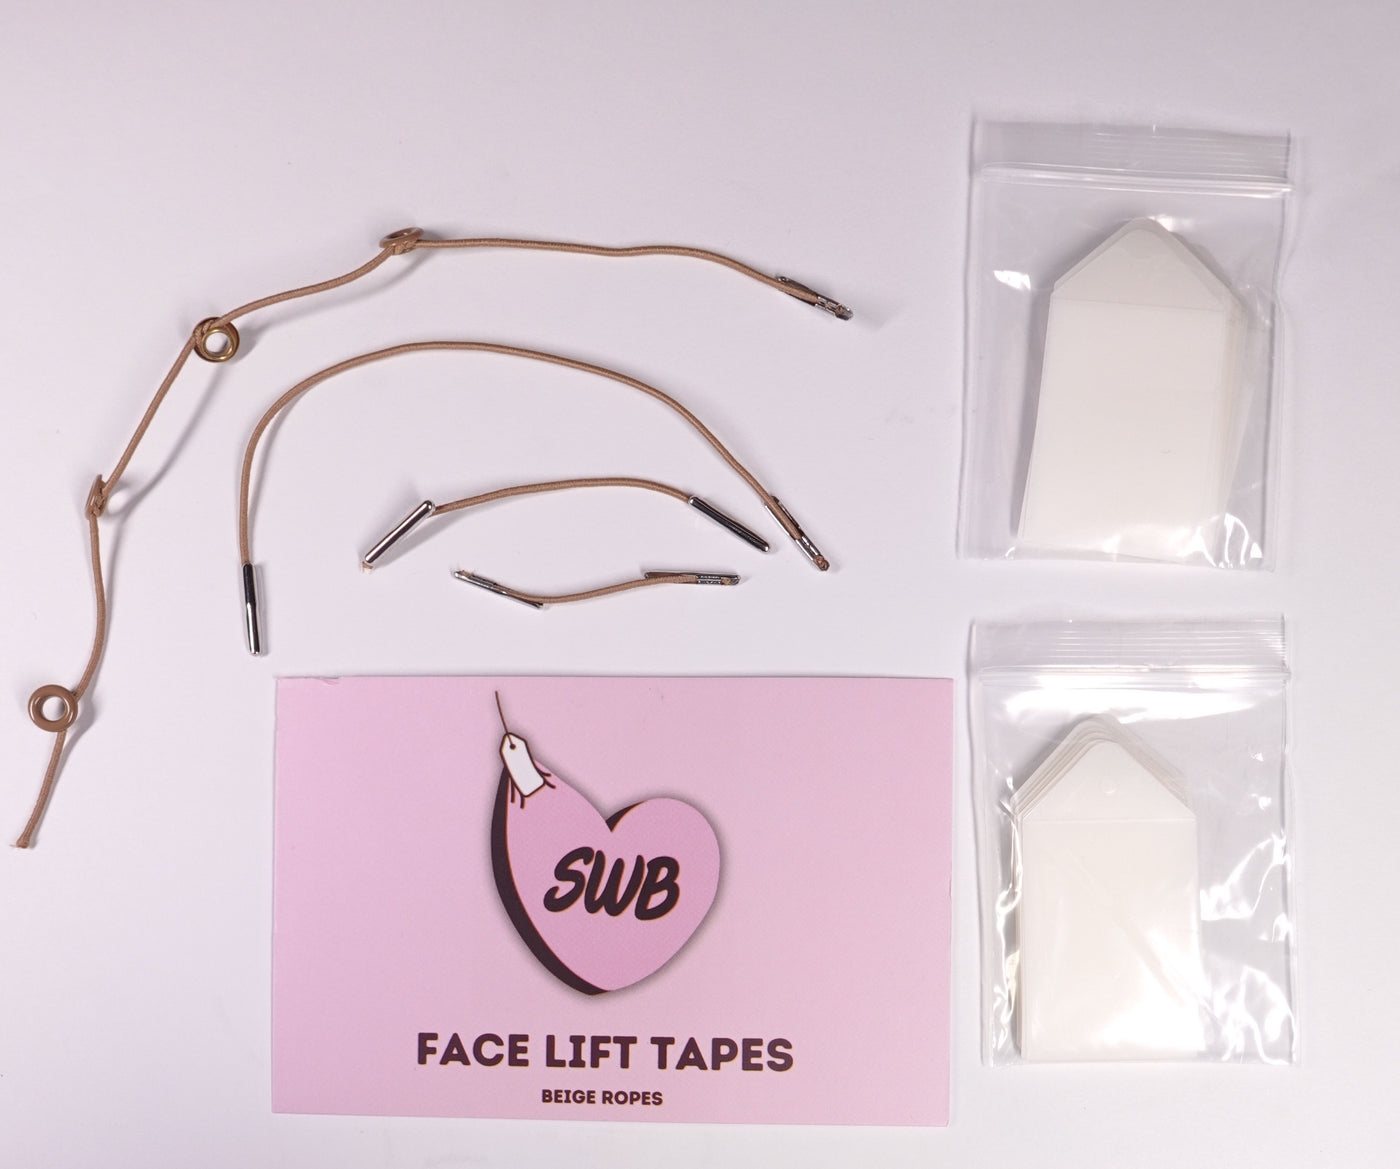 Face Lift Tapes